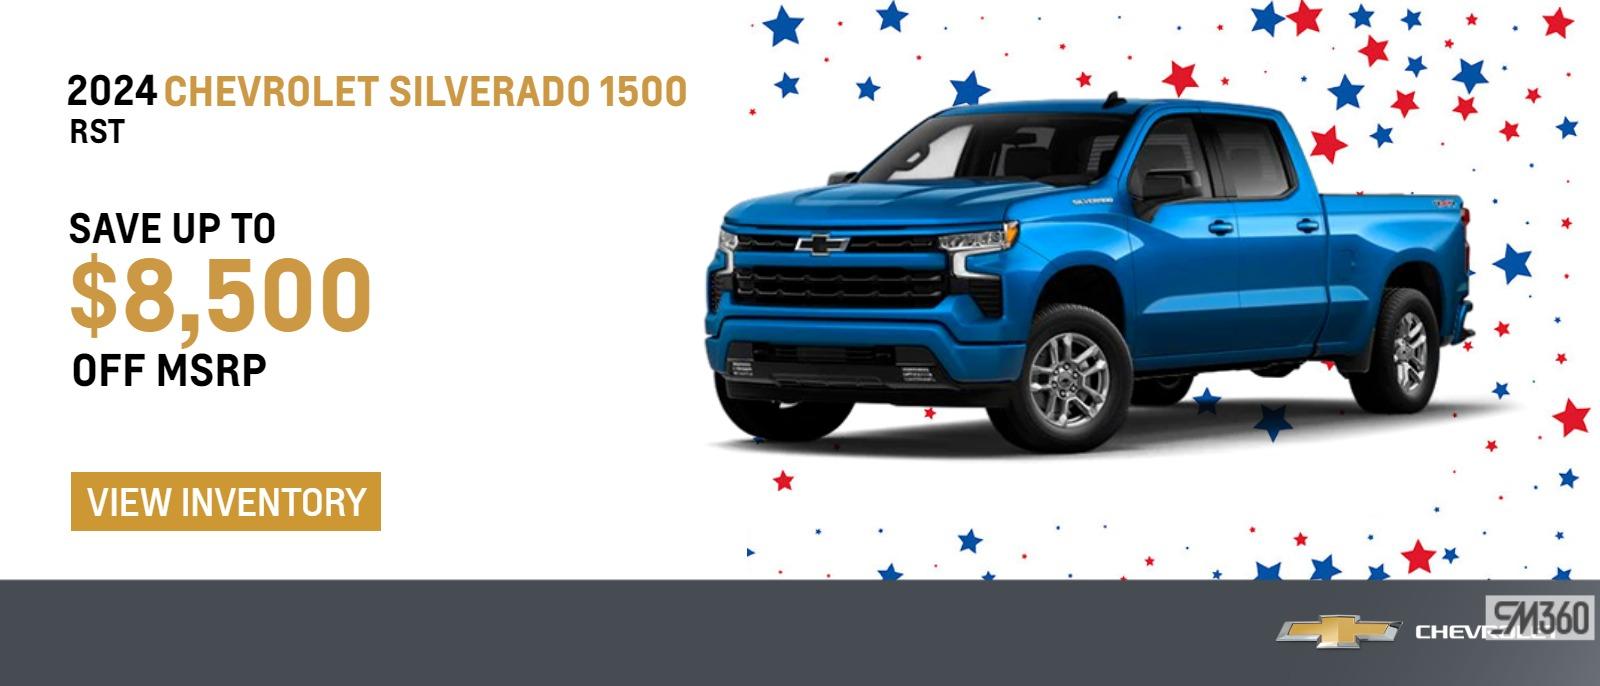 2024 Chevrolet Silverado 1500 RST
Save up to $8,500 OFF MSRP